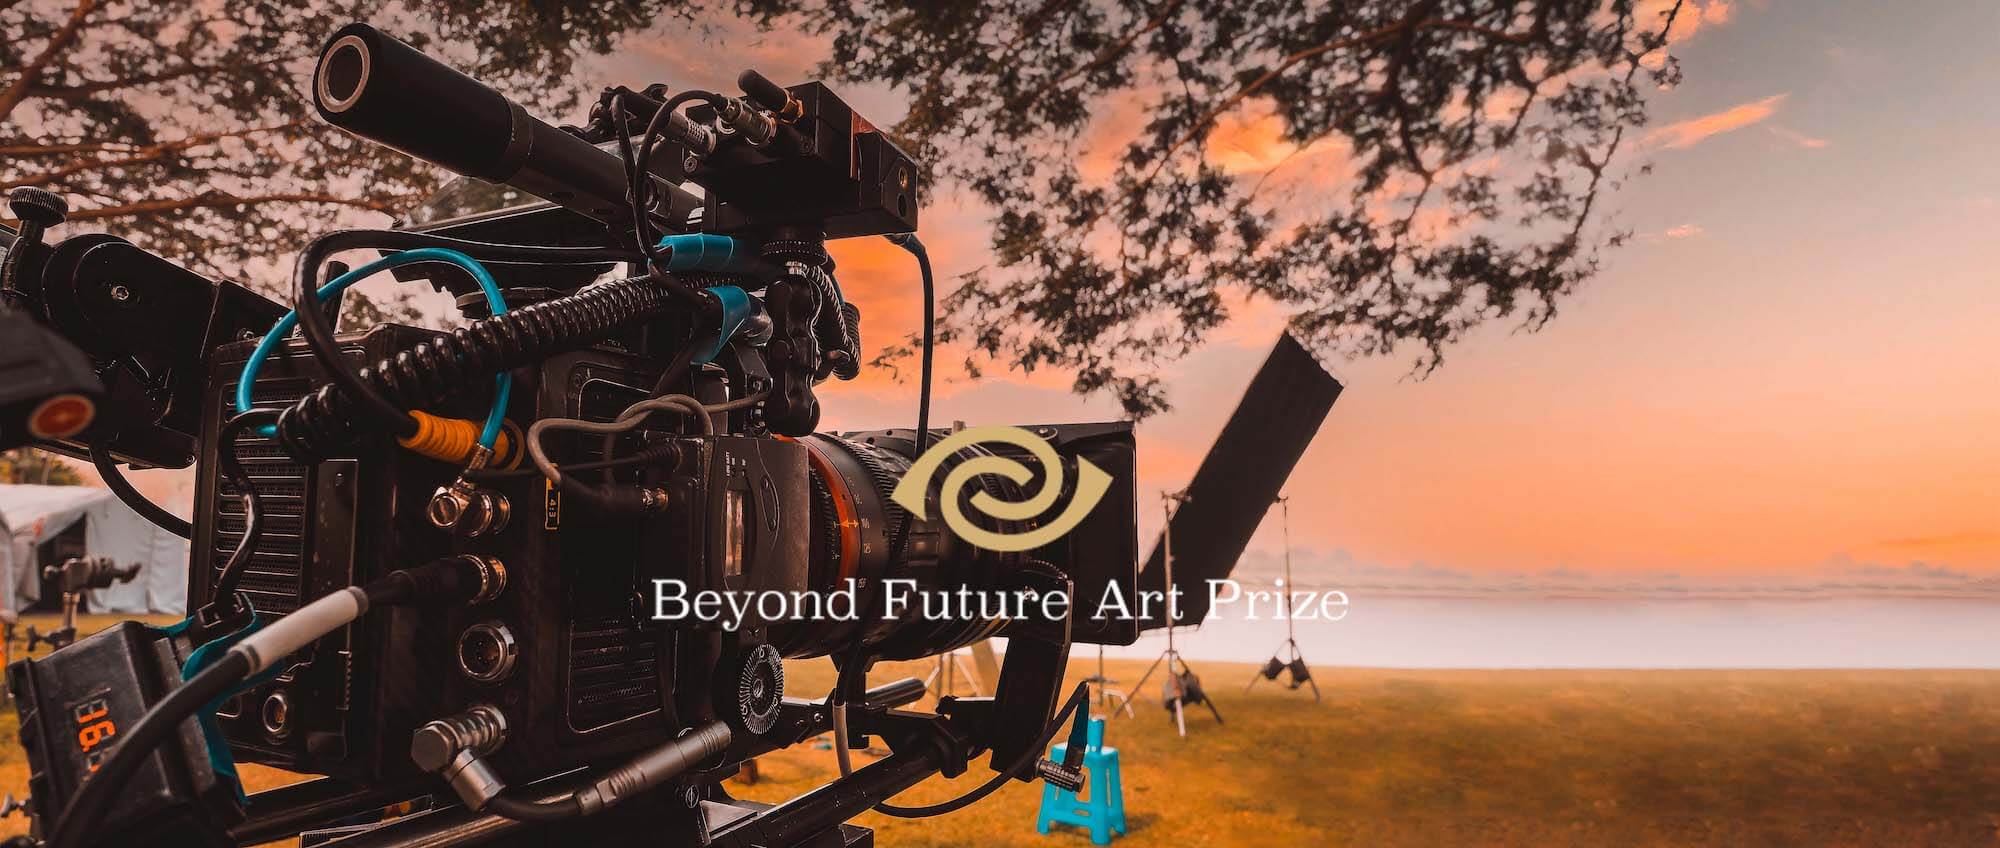 Beyond Future Art Prize makes global call for artists to share visions for sustainable future